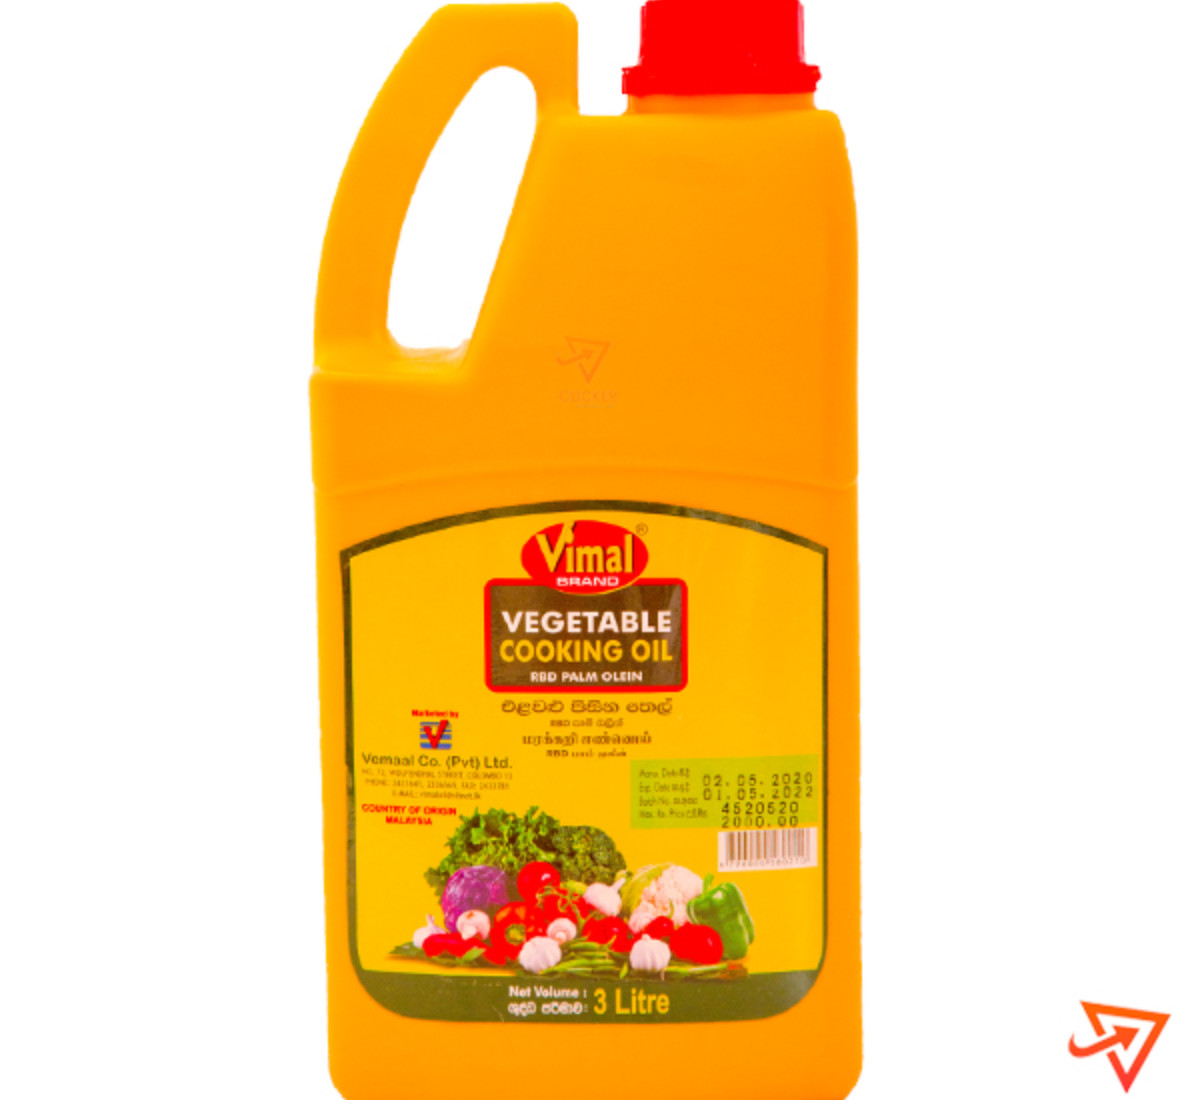 Clicker product 3L VIMAL Vegetable Cooking Oil 875